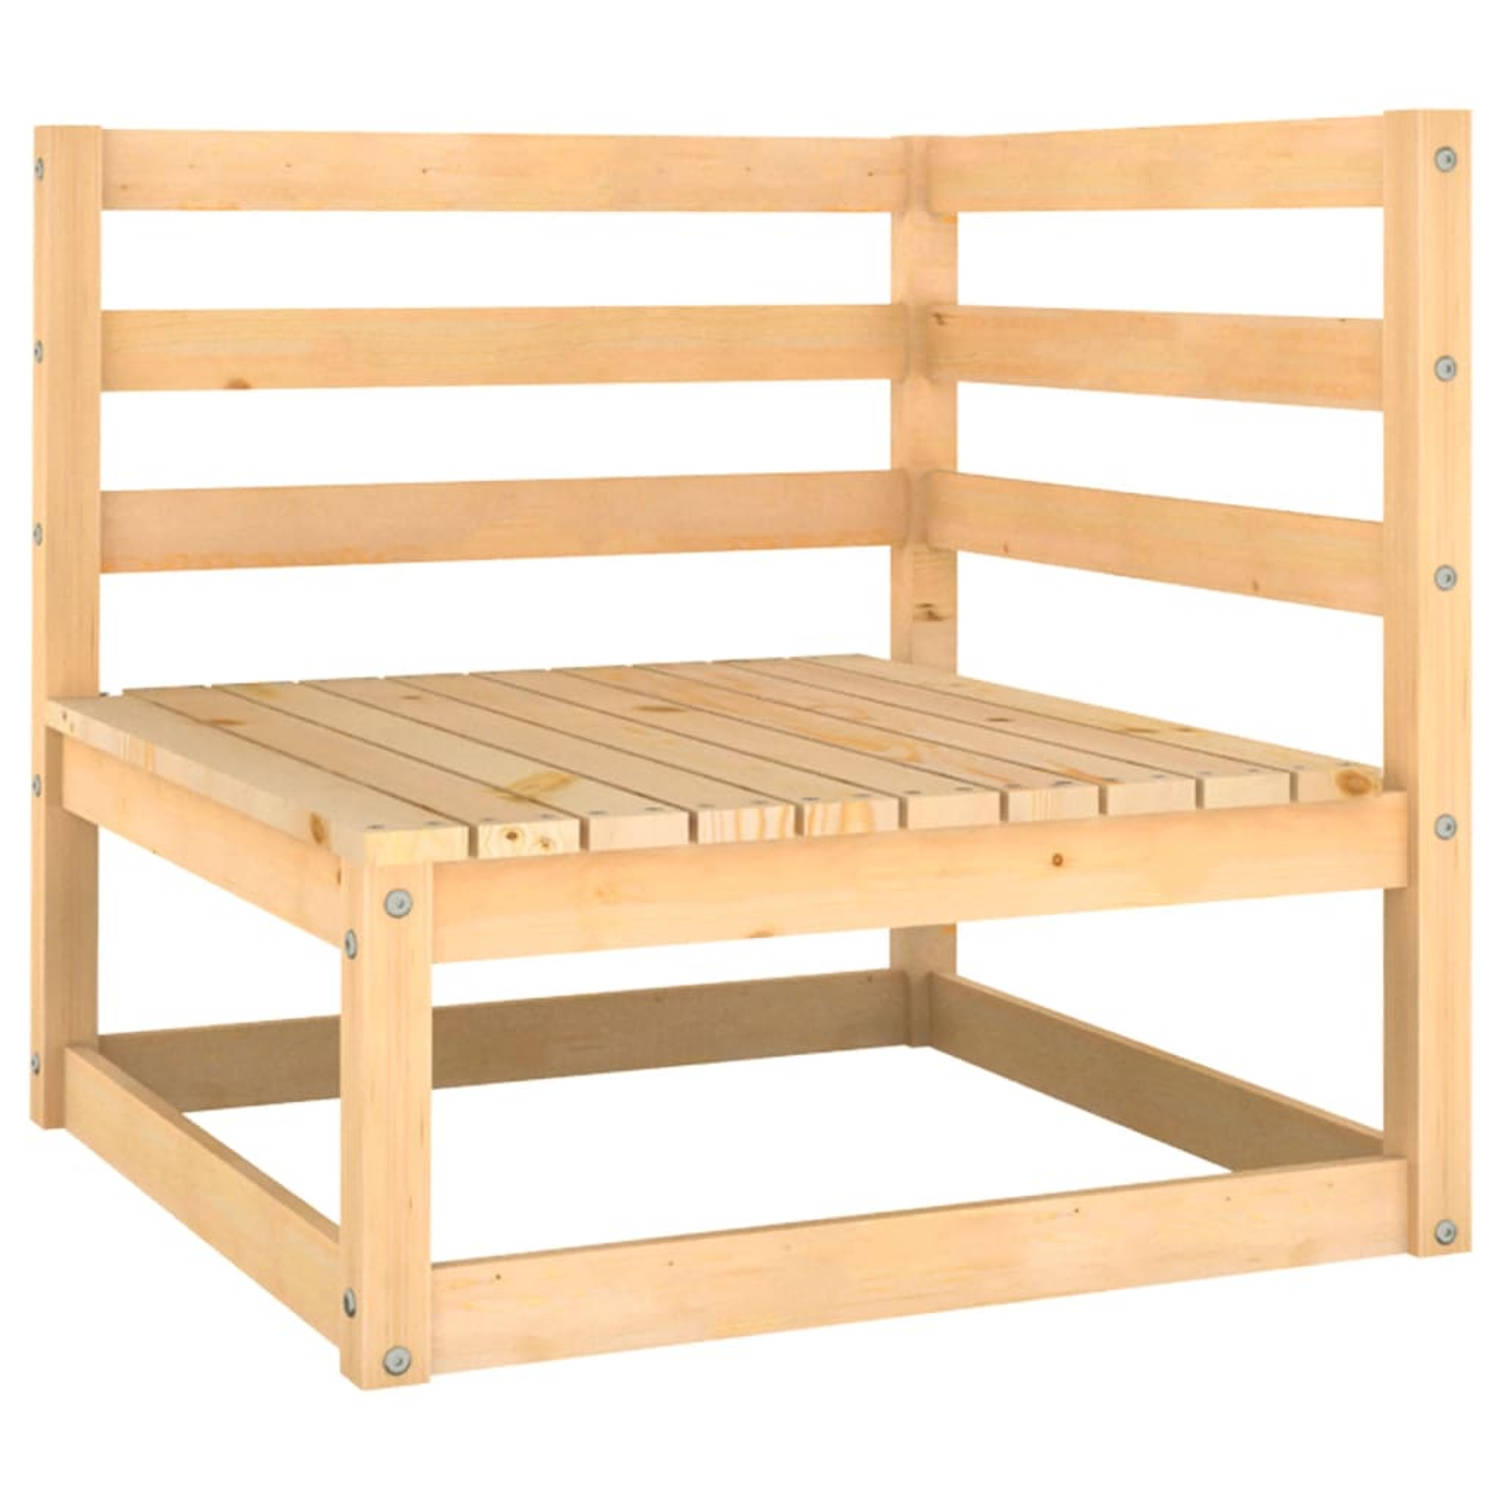 The Living Store Pallet Loungeset - Grenenhout - Antraciet - 70x70x67cm - Modulair